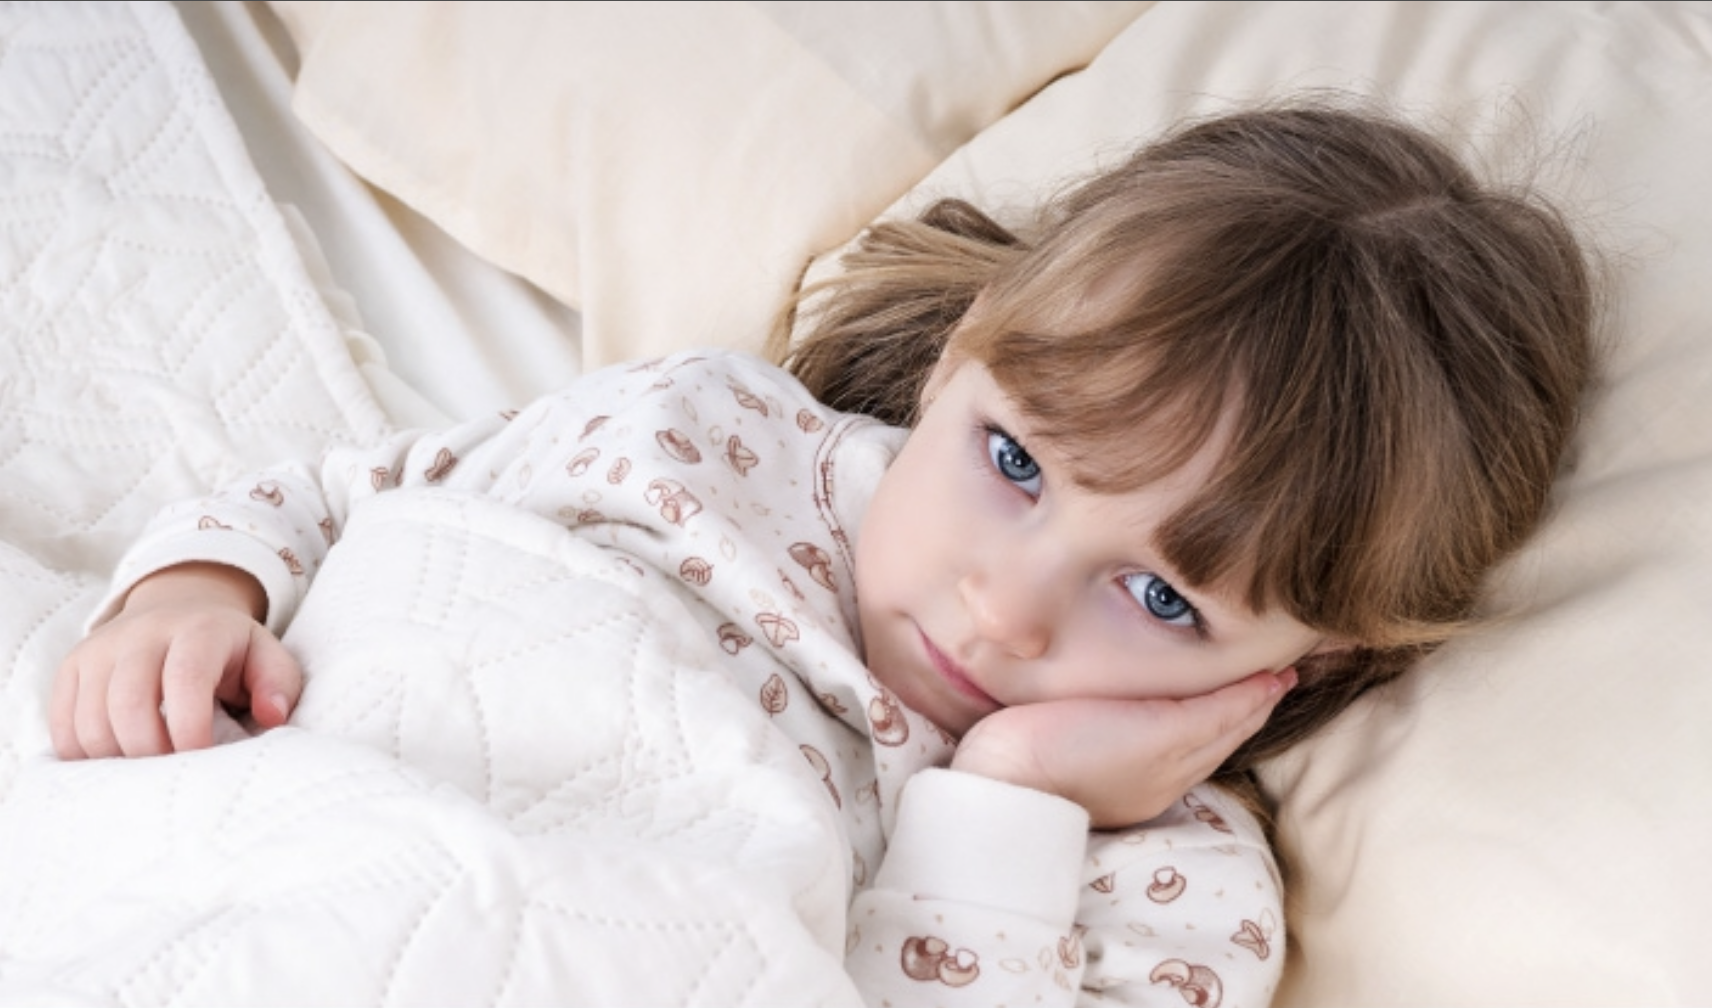 Resting Child - Ear Infections